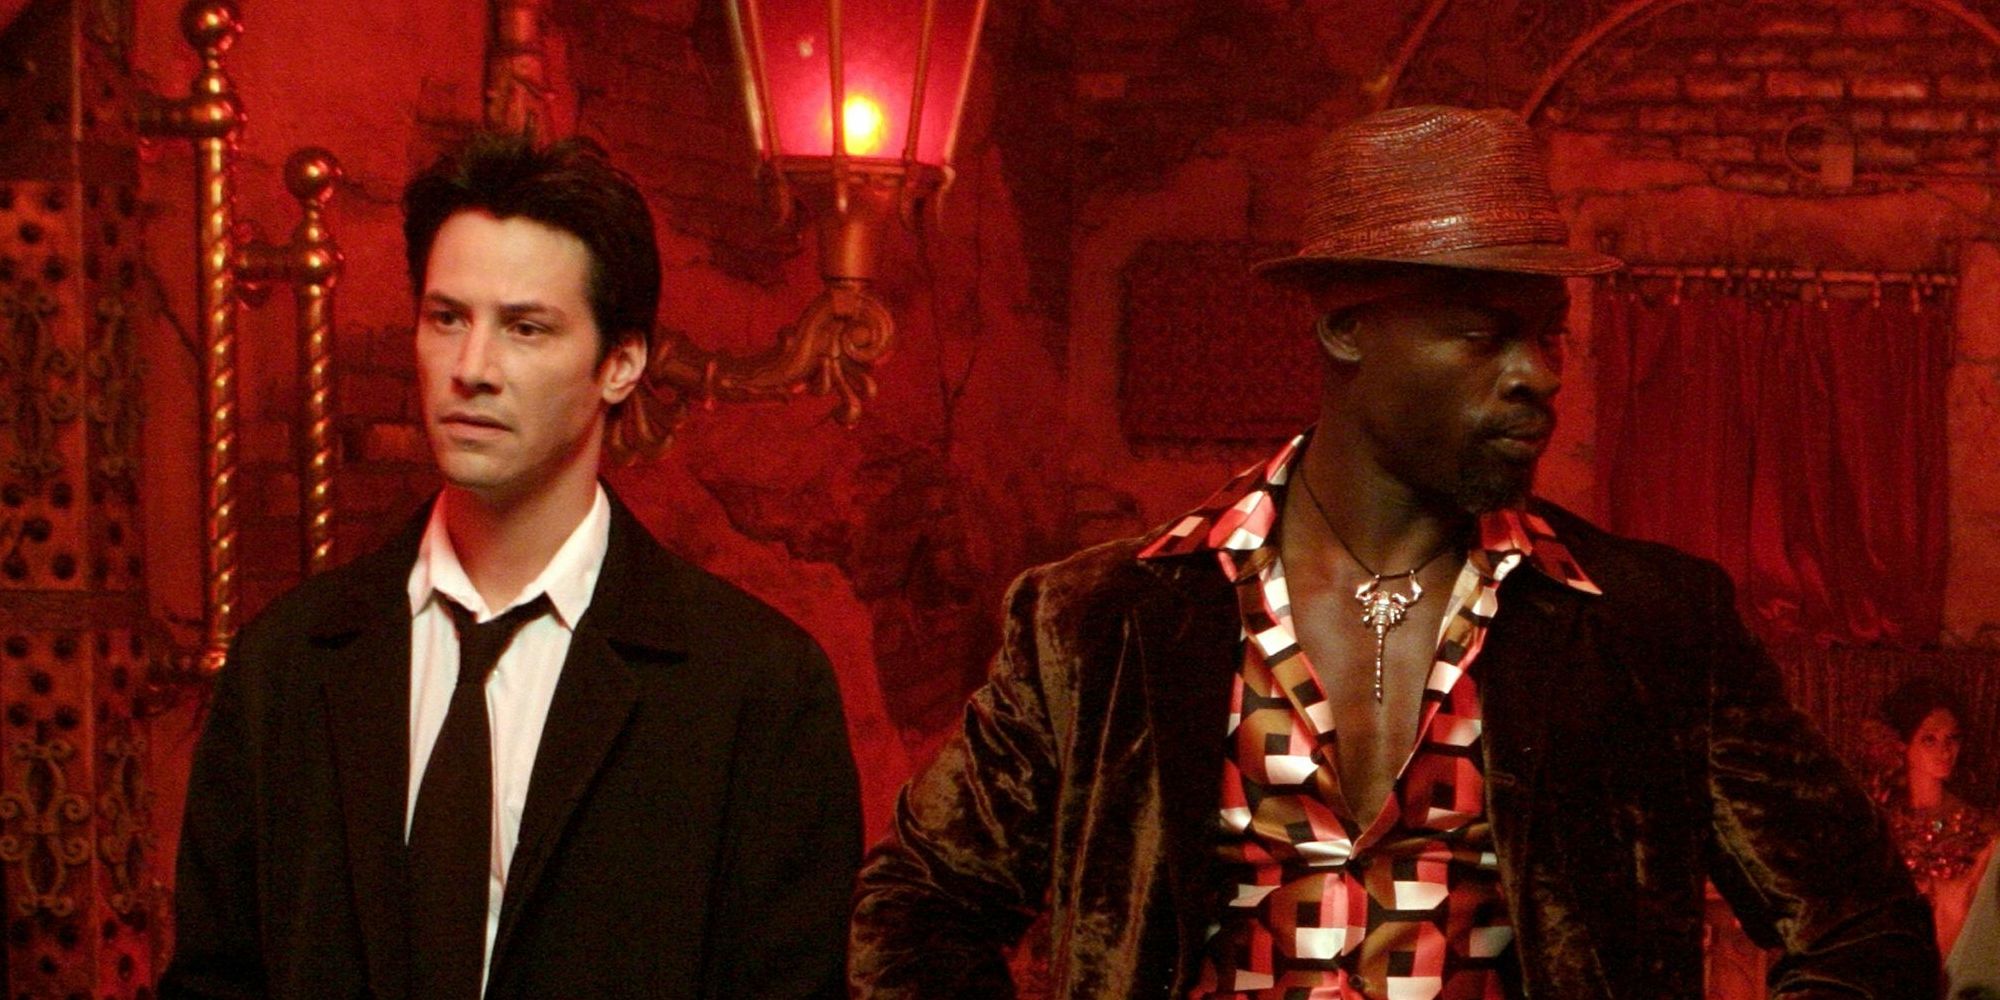 Keanu Reeves standing next to Djimon Hounsou in the 2005 film Constantine.